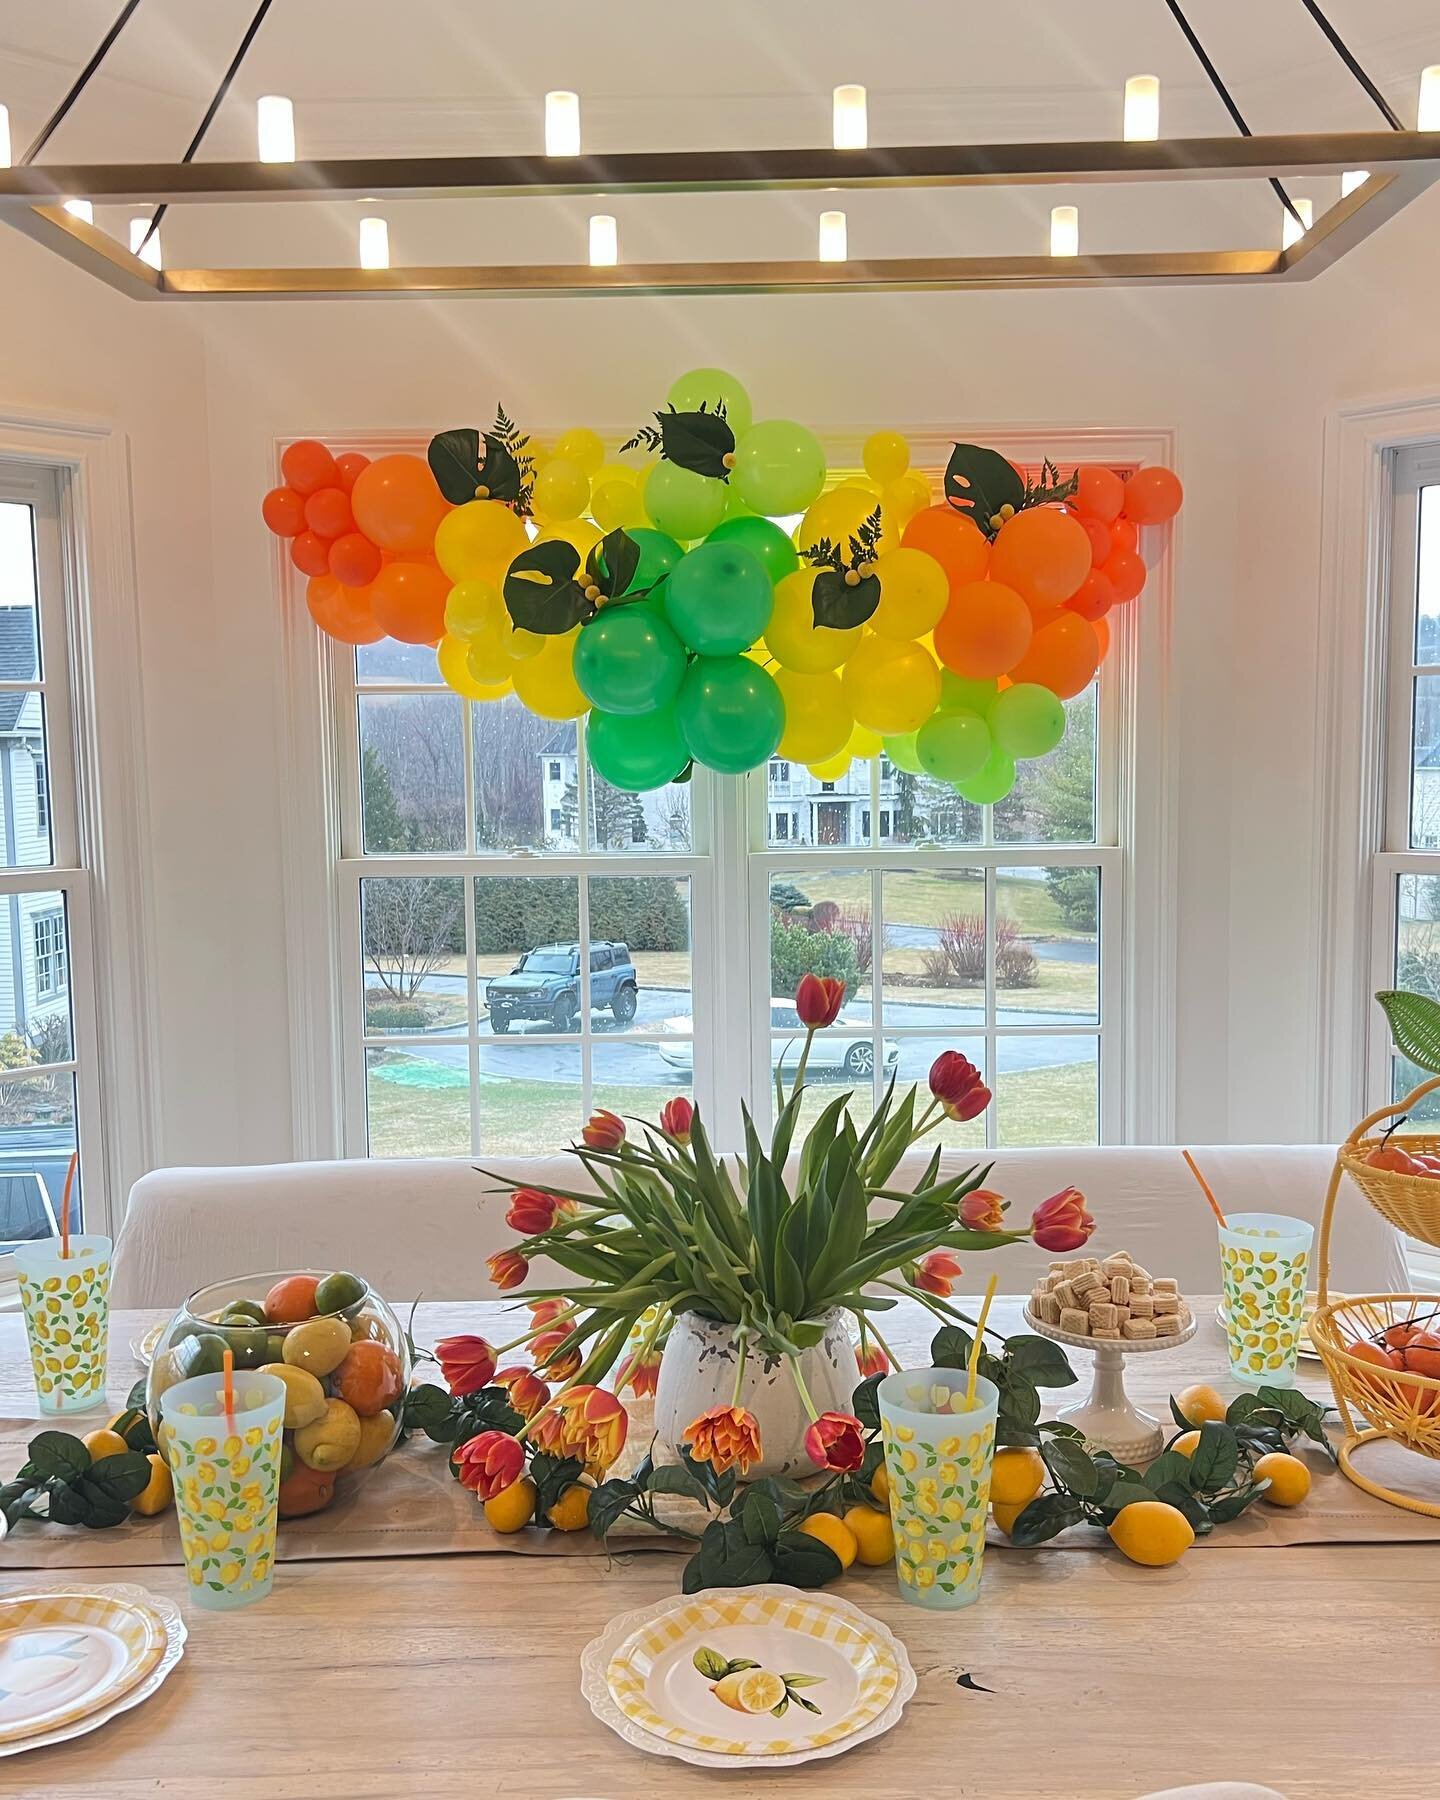 The weekend was a whole lot of balloons 🎈!! So grateful to be able to connect with Ashley &amp; Michele @ridgefield_moms and pull together these fun citrus 🍊 themed garland and 💗💓💕11th Birthday ring for their wkend celebrations&hellip;&hellip;.l